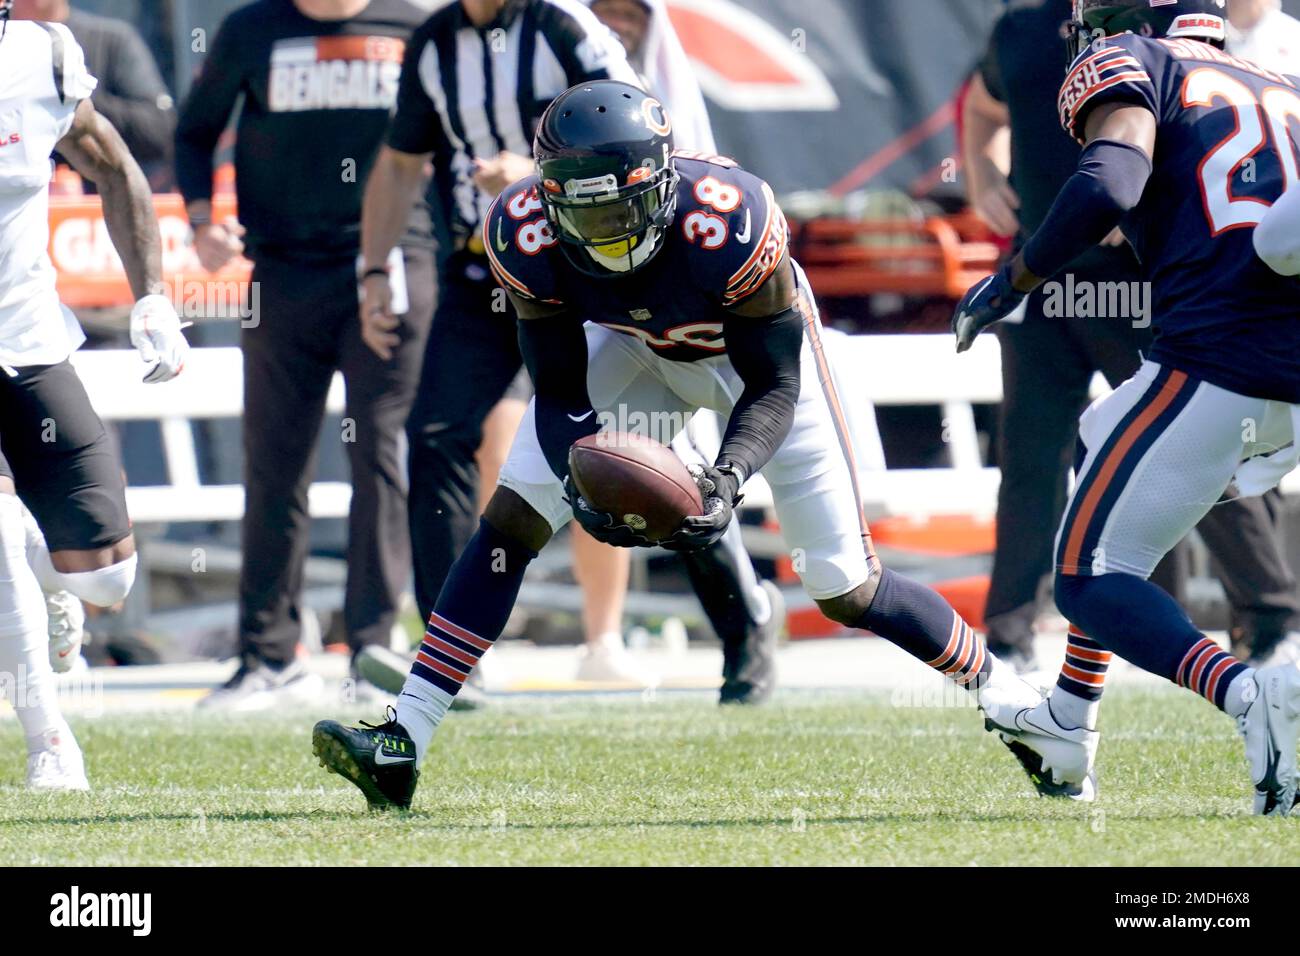 Chicago Bears strong safety Tashaun Gipson recovers a fumble by Cincinnati  Bengals' Tee Higgins during the second half of an NFL football game Sunday,  Sept. 19, 2021, in Chicago. (AP Photo/Nam Y.